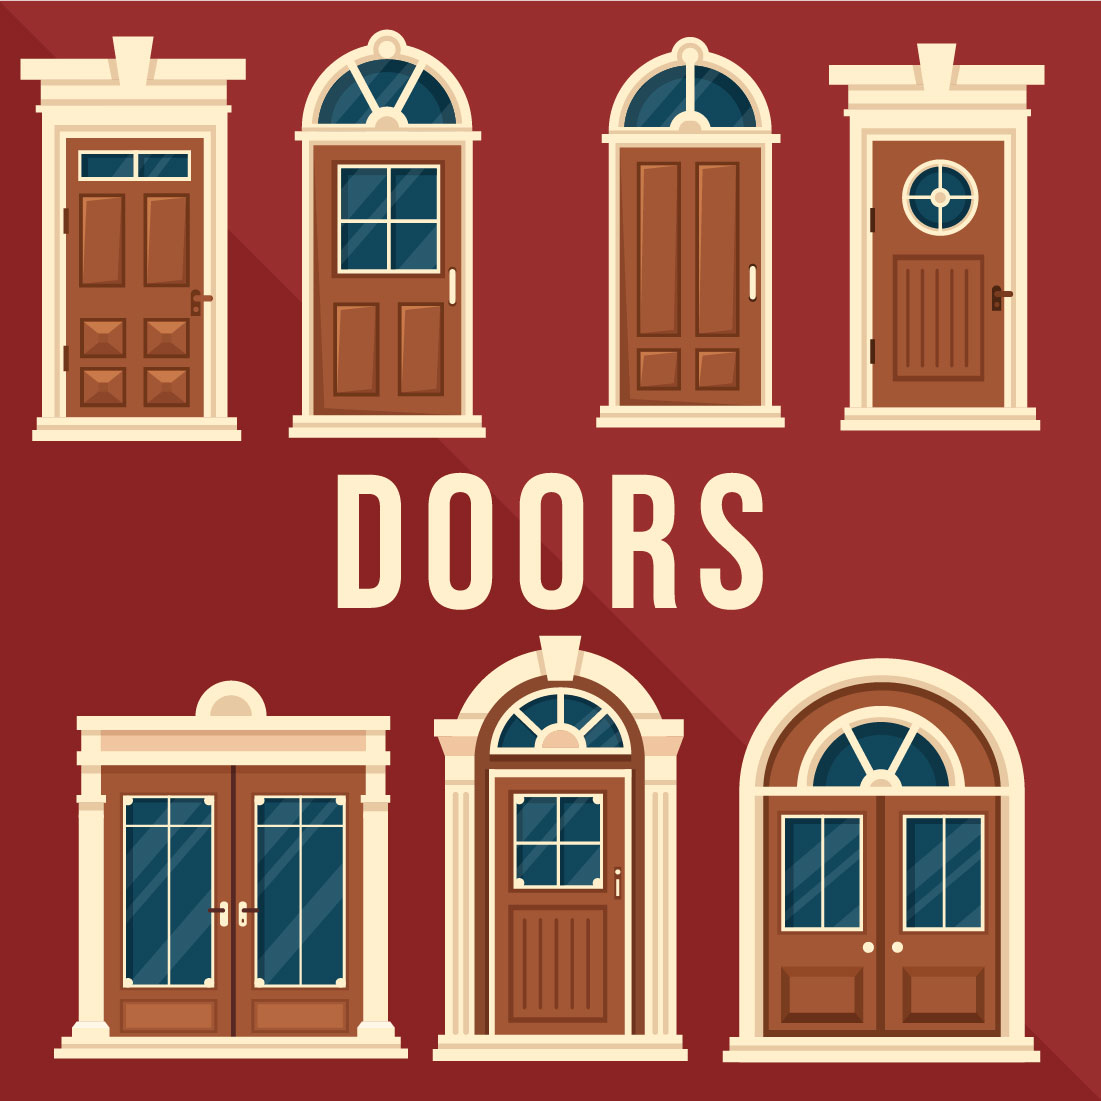 Doors and Windows Design Illustration cover image.